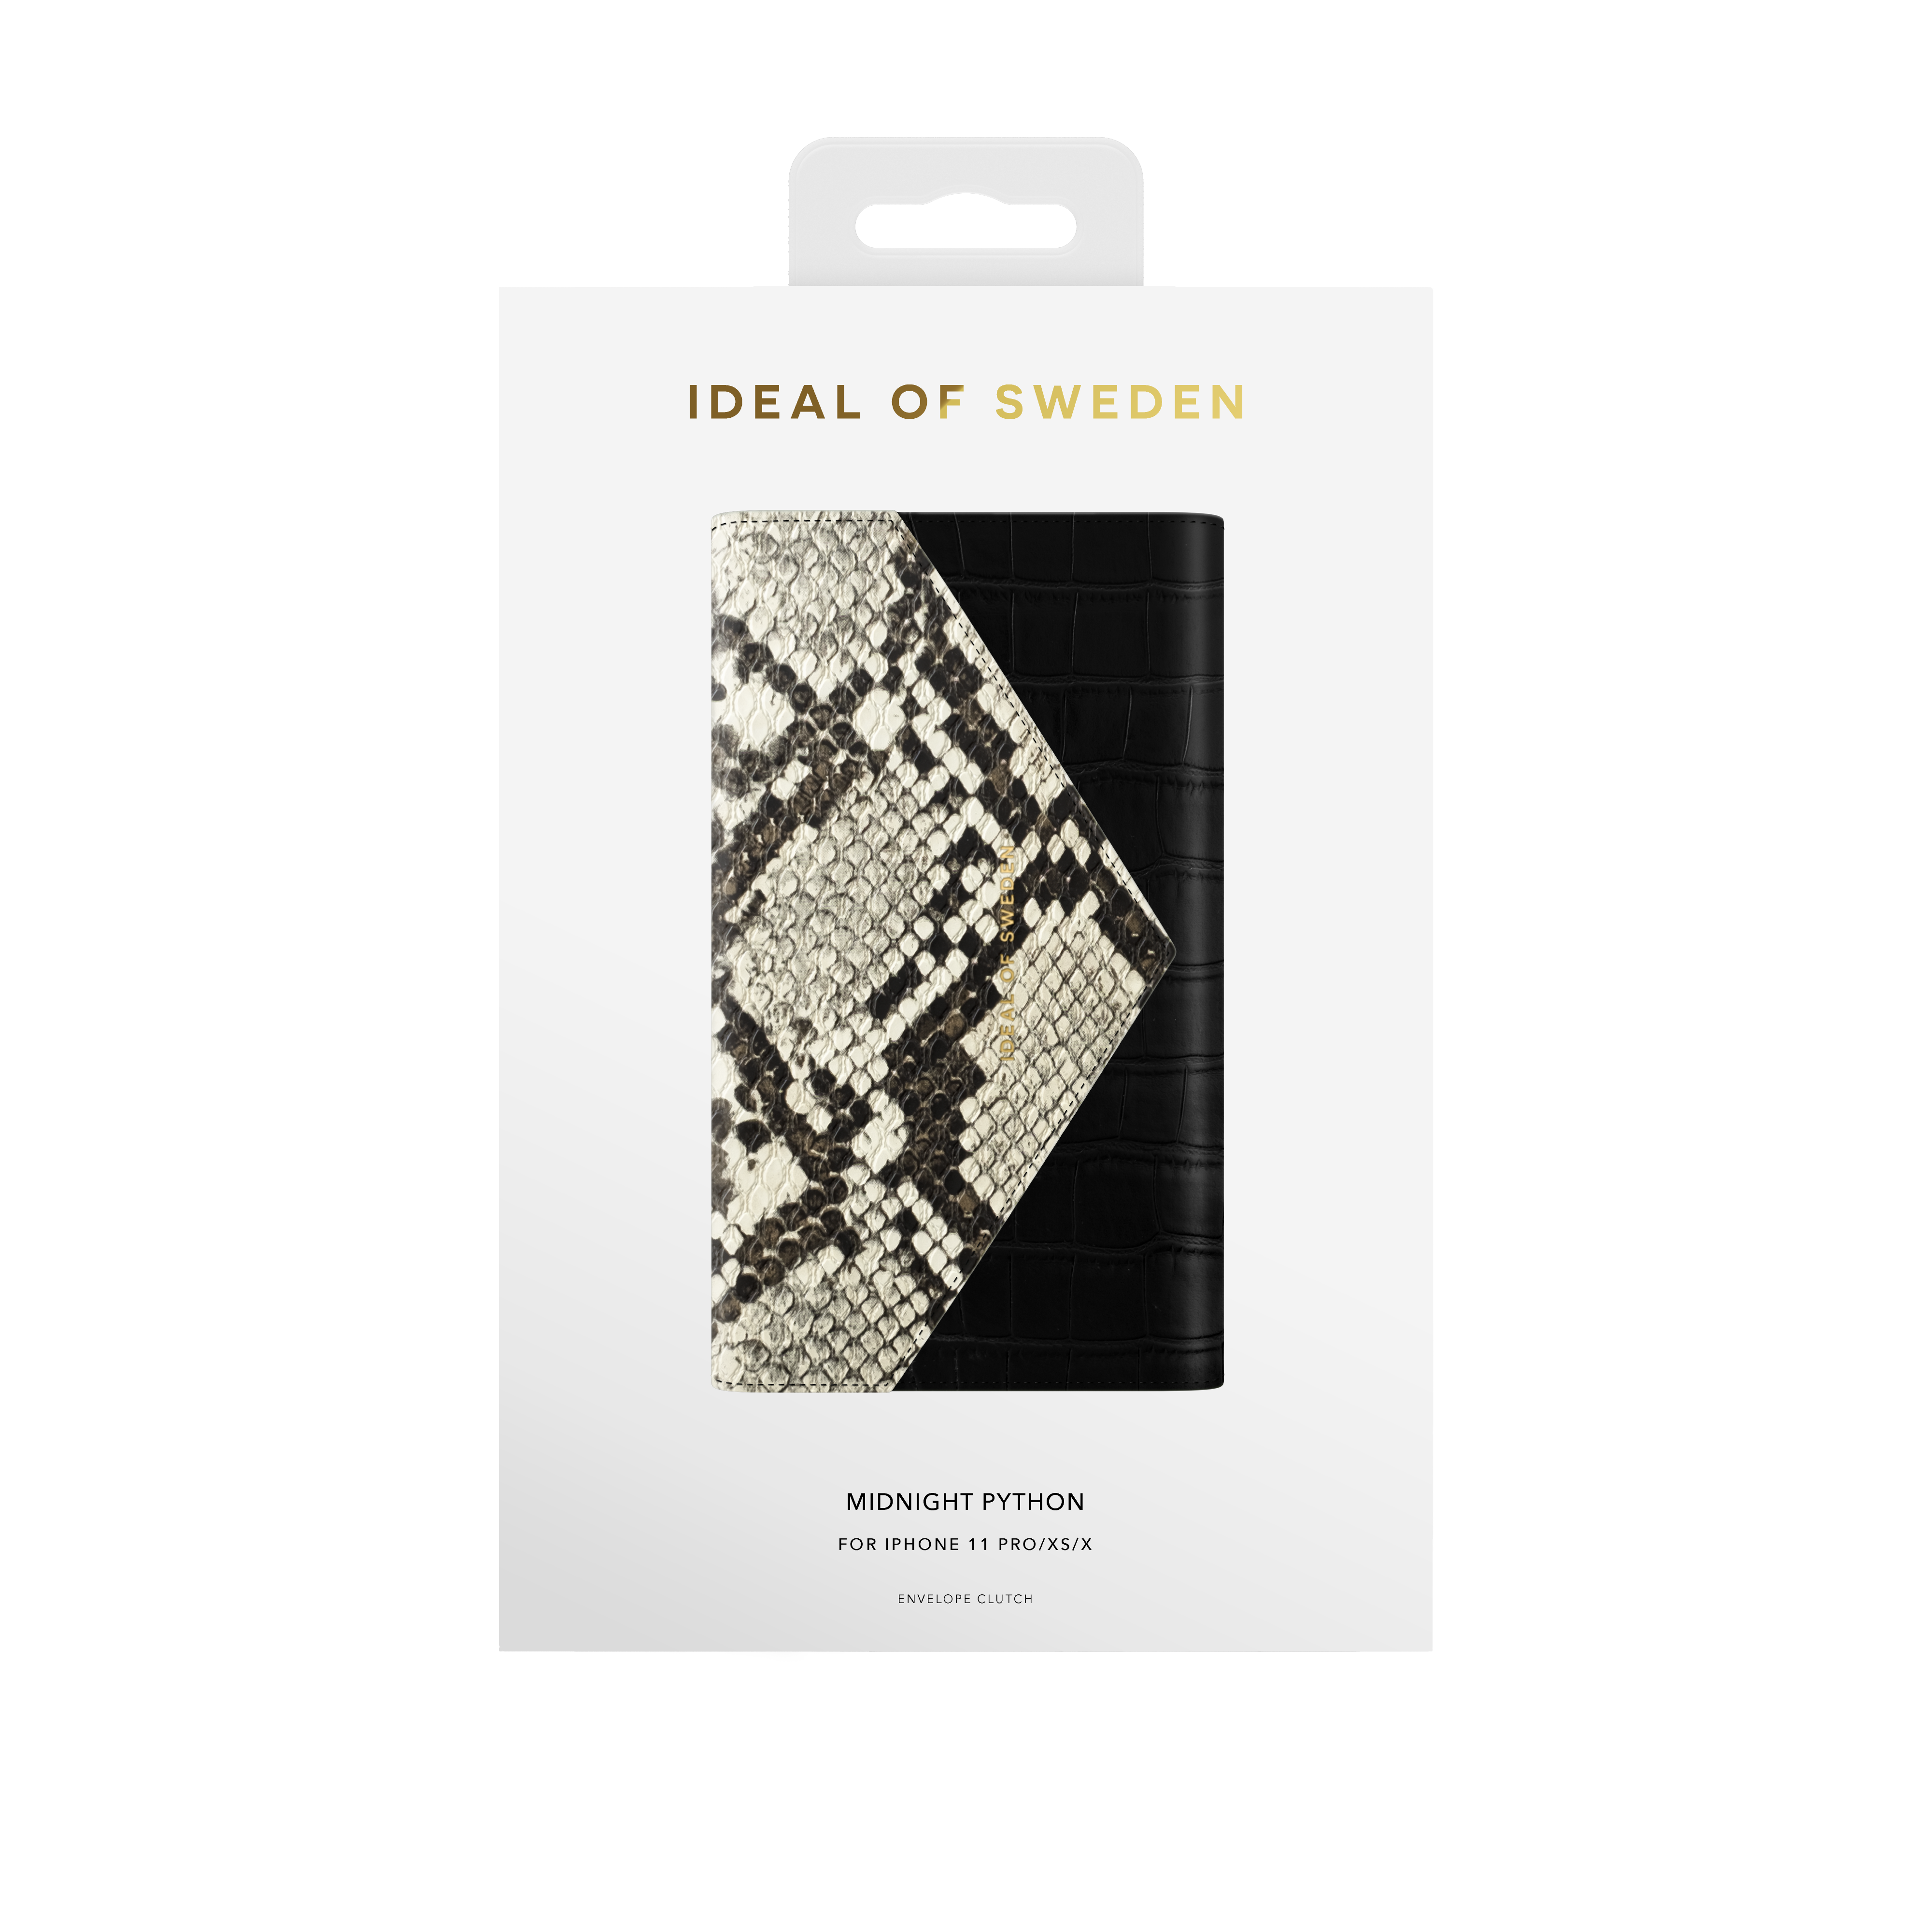 11 SWEDEN Pro, Cover, X, IDEAL IDECSS20-I1958-199, iPhone OF Python iPhone Midnight Apple, XS, iPhone Full